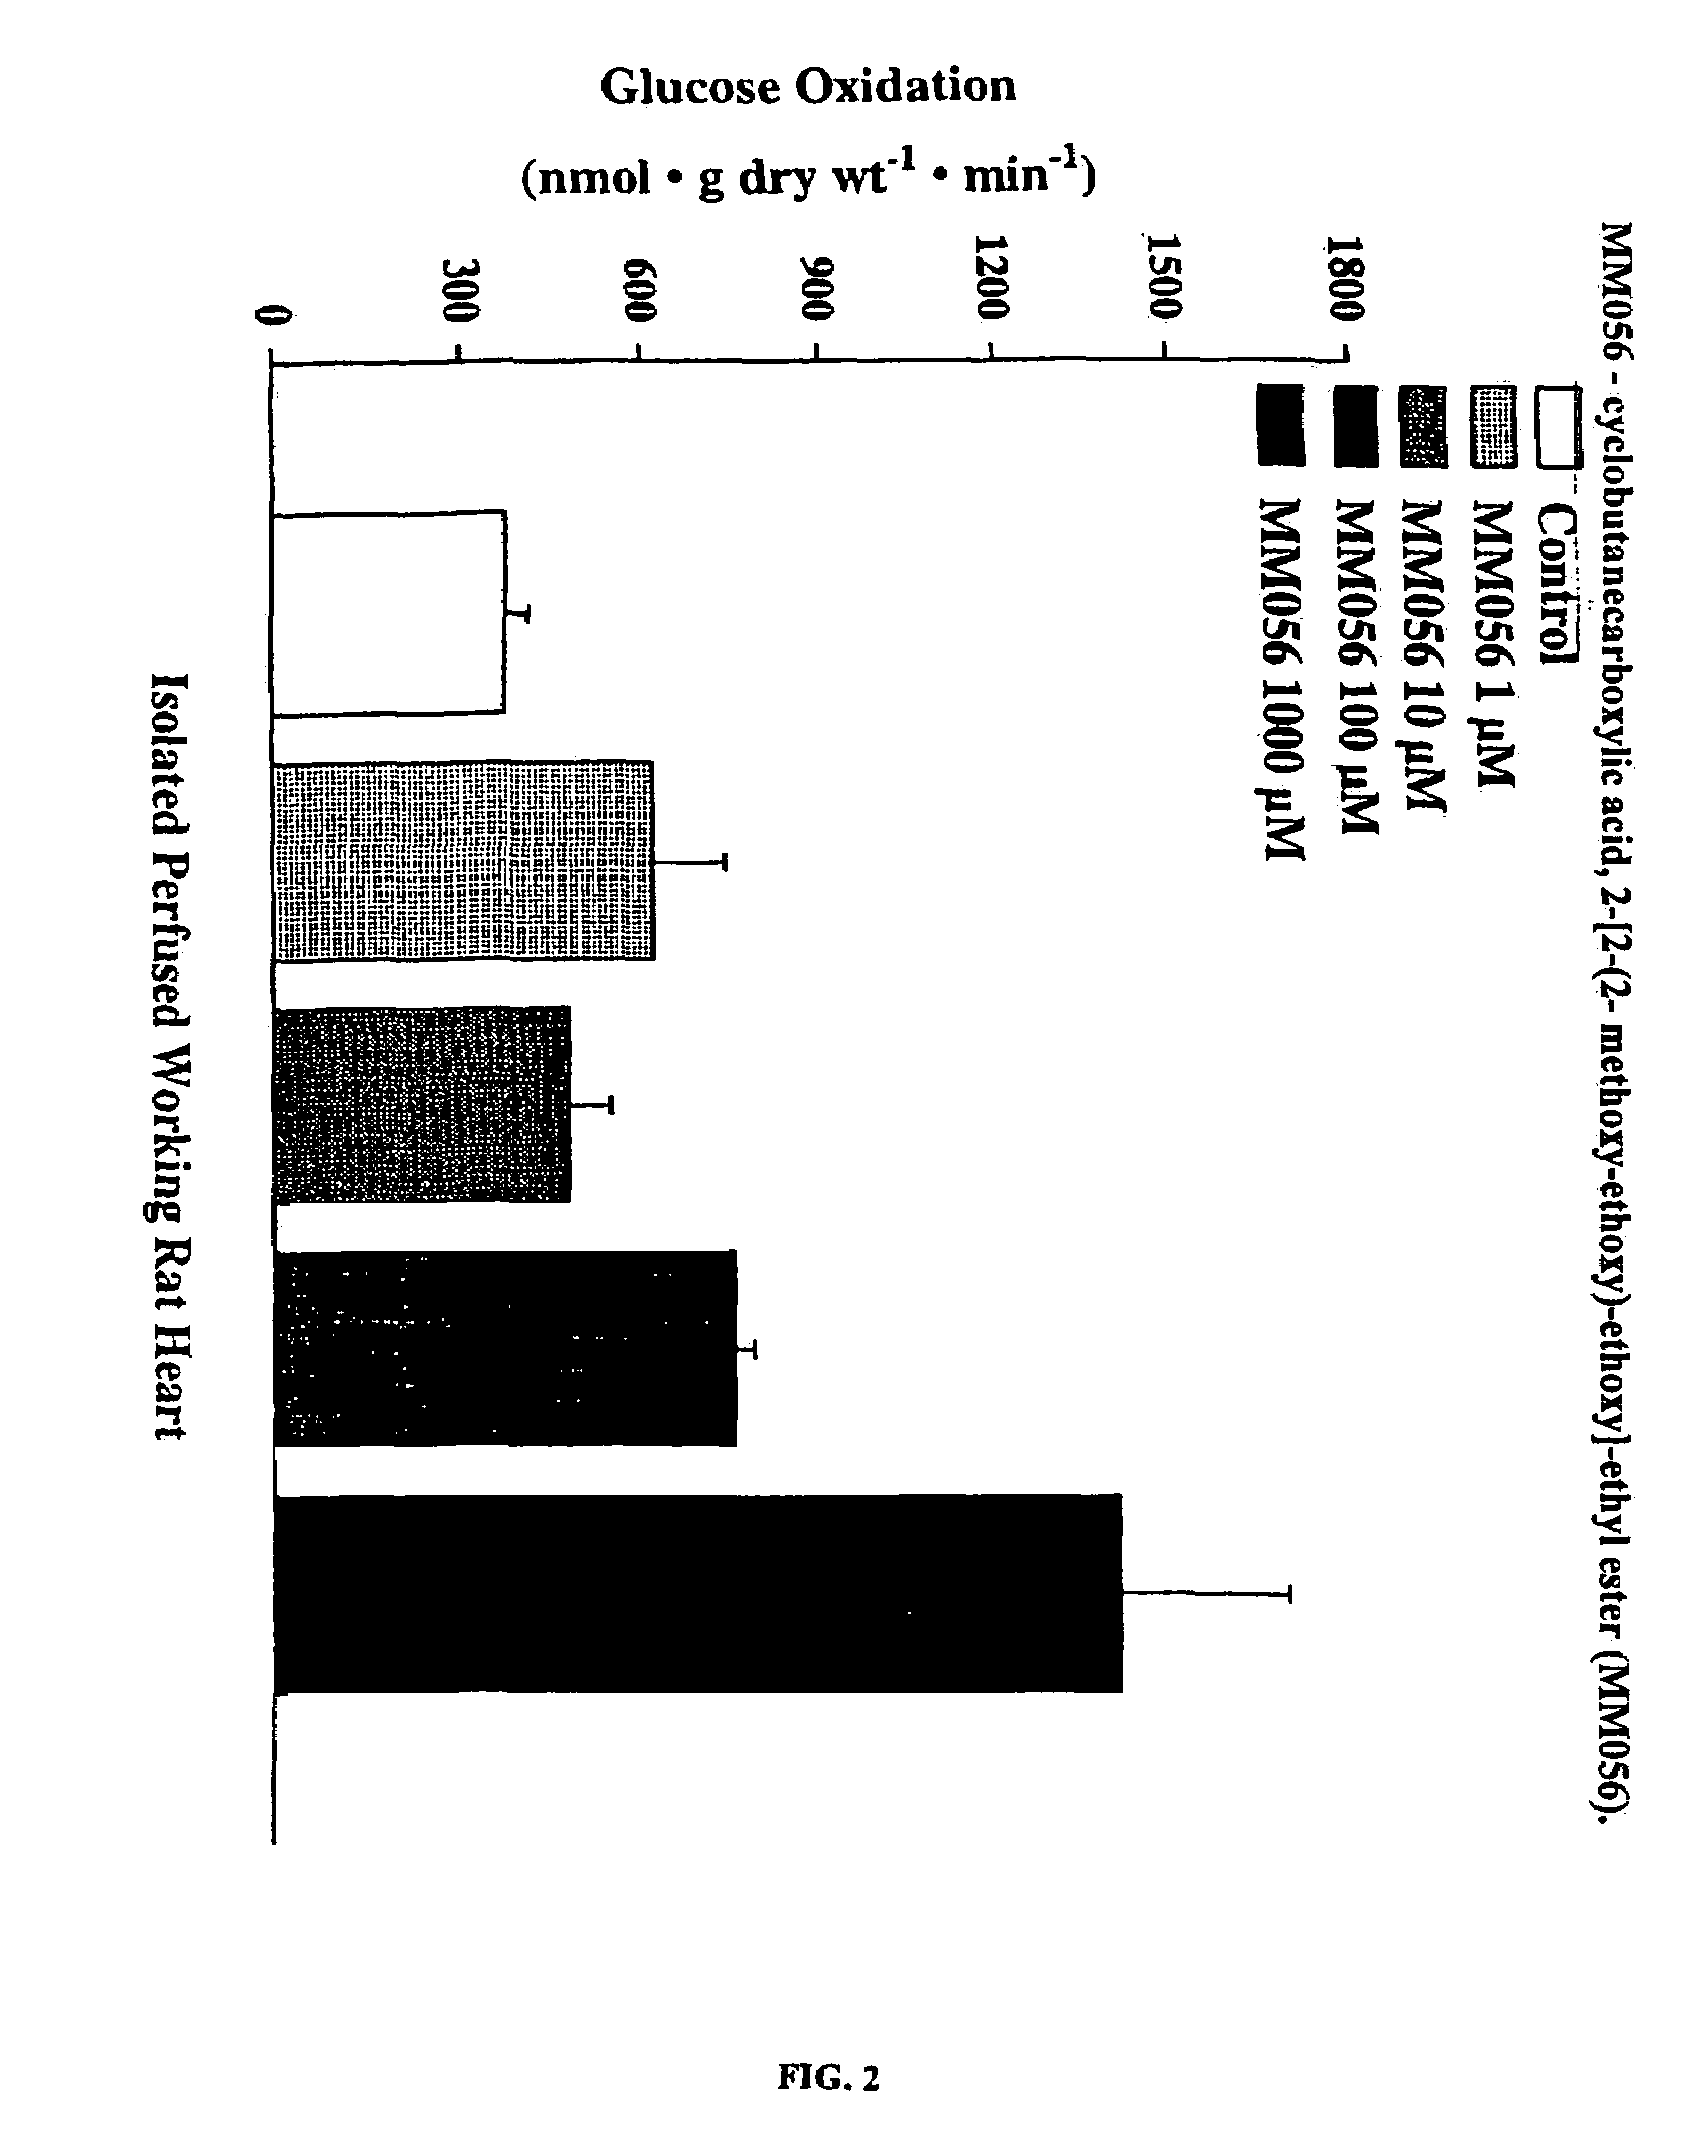 Compounds that stimulate glucose utilization and methods of use